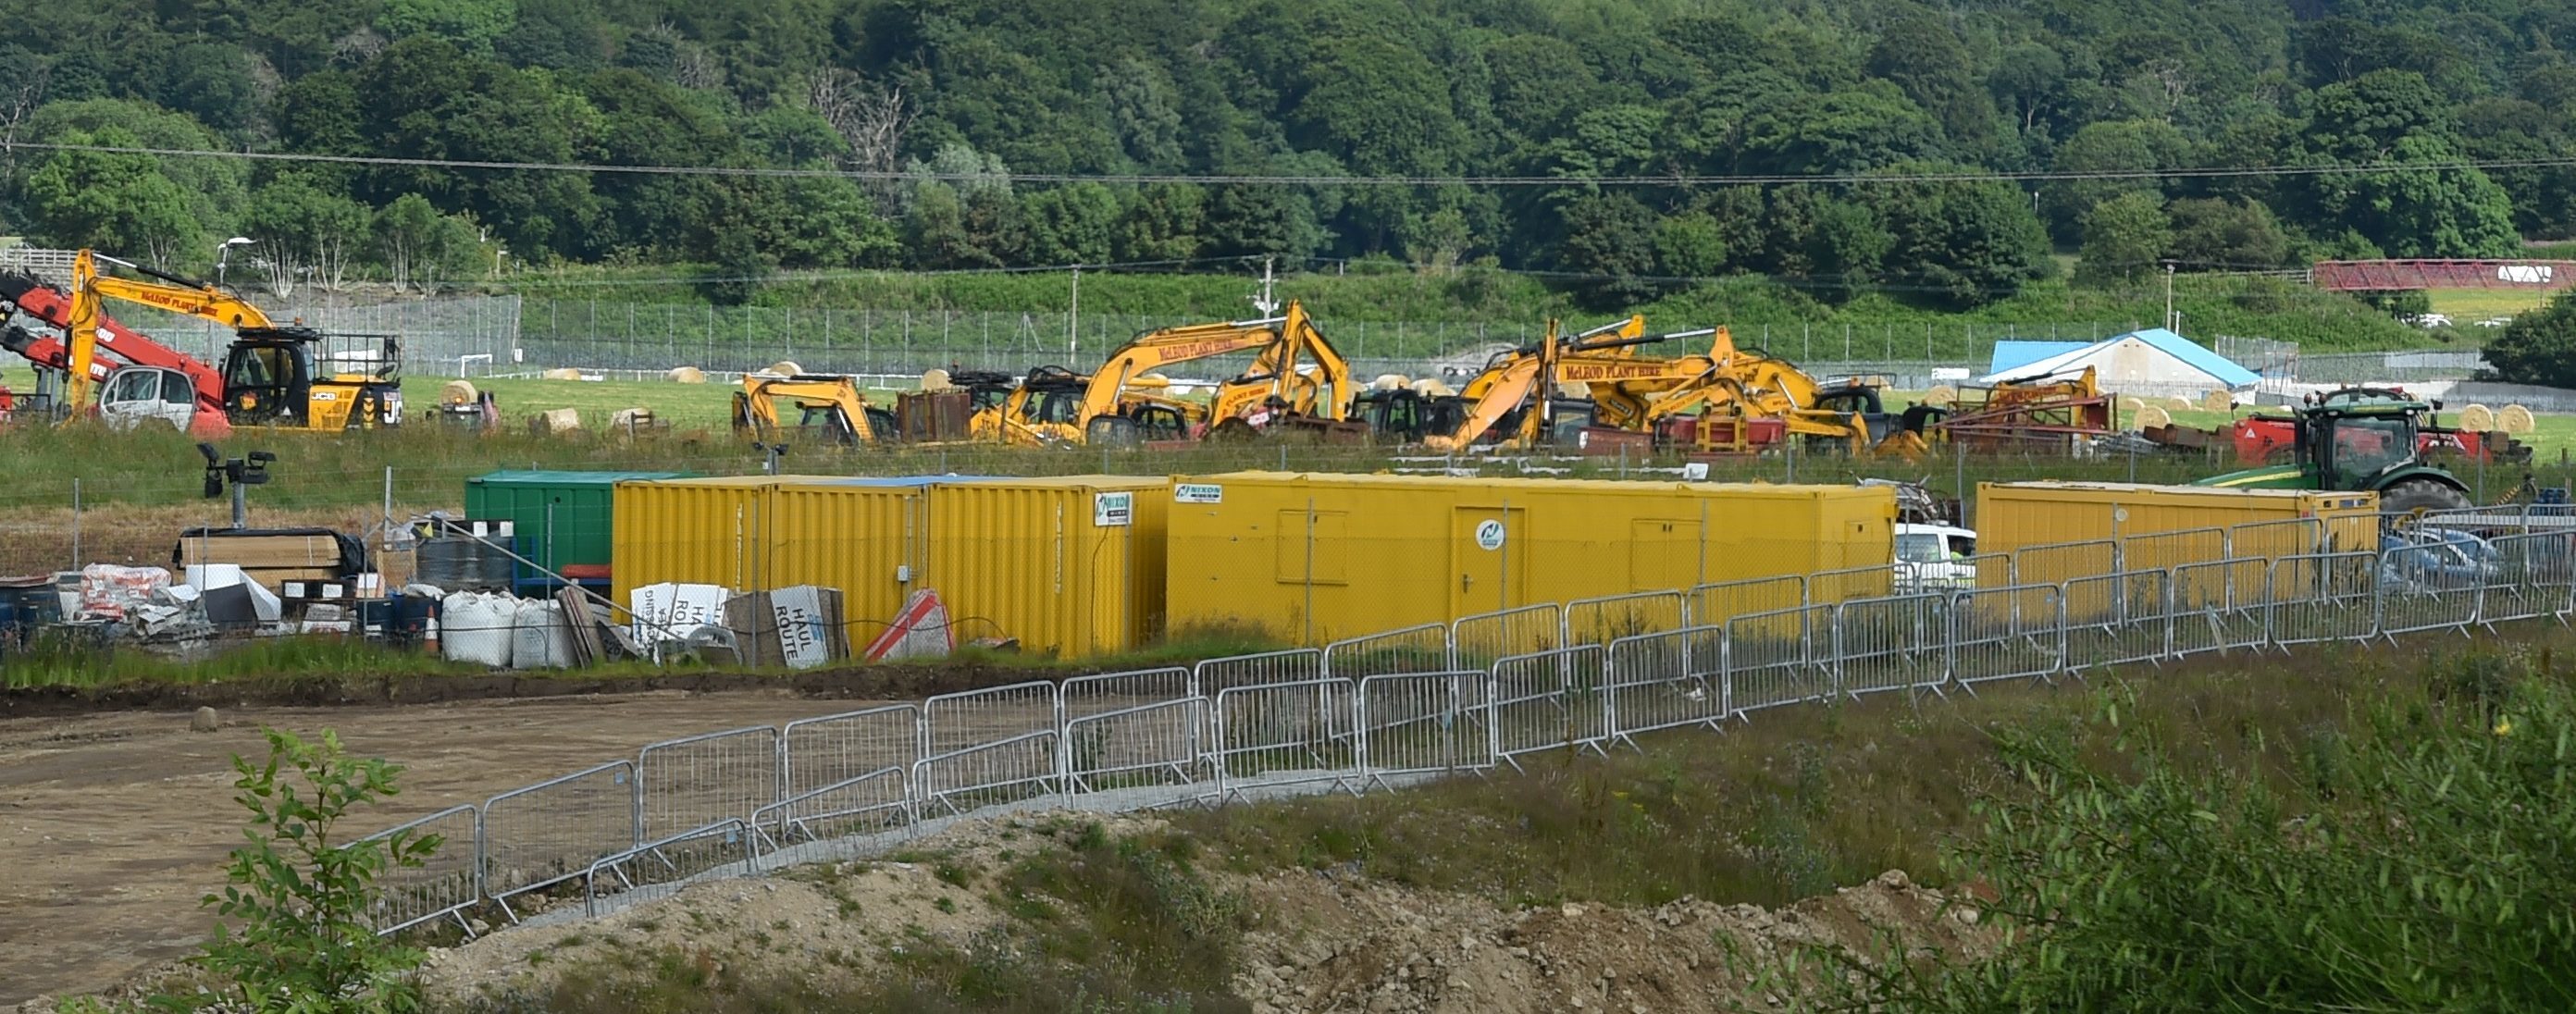 Yellow cabins are used which contain toilet and canteen facilities.
Picture by COLIN RENNIE    July 11, 2017.